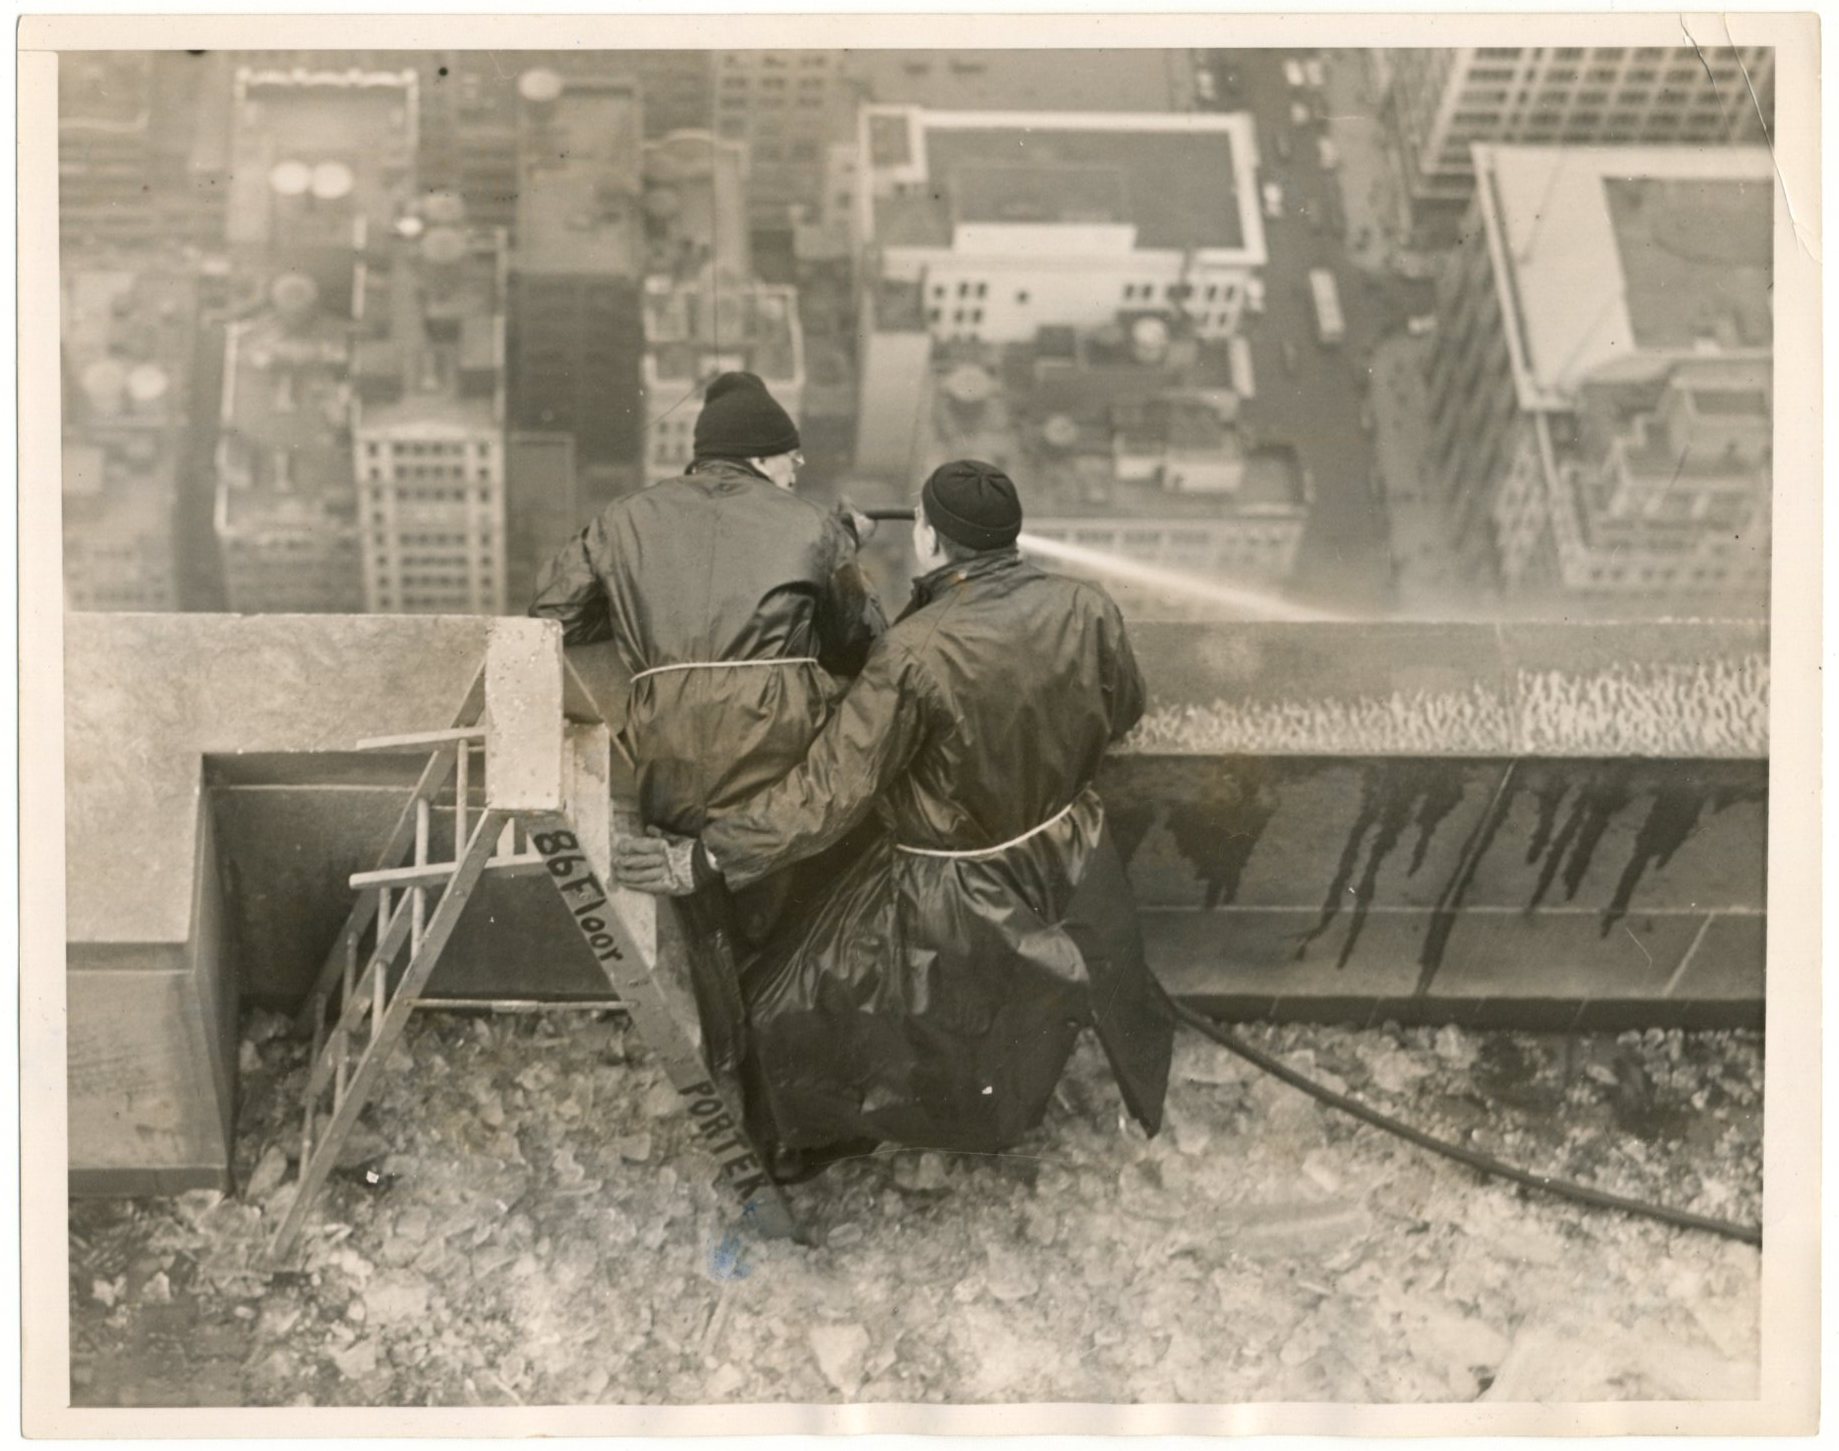 In my collection from years ago. Writing on the back says, "Ice Falling From Empire State Bldg. Two workers clearing ice on the outside of the 86th floor, with warm water." Credit: ACME. March 15, 1940. 